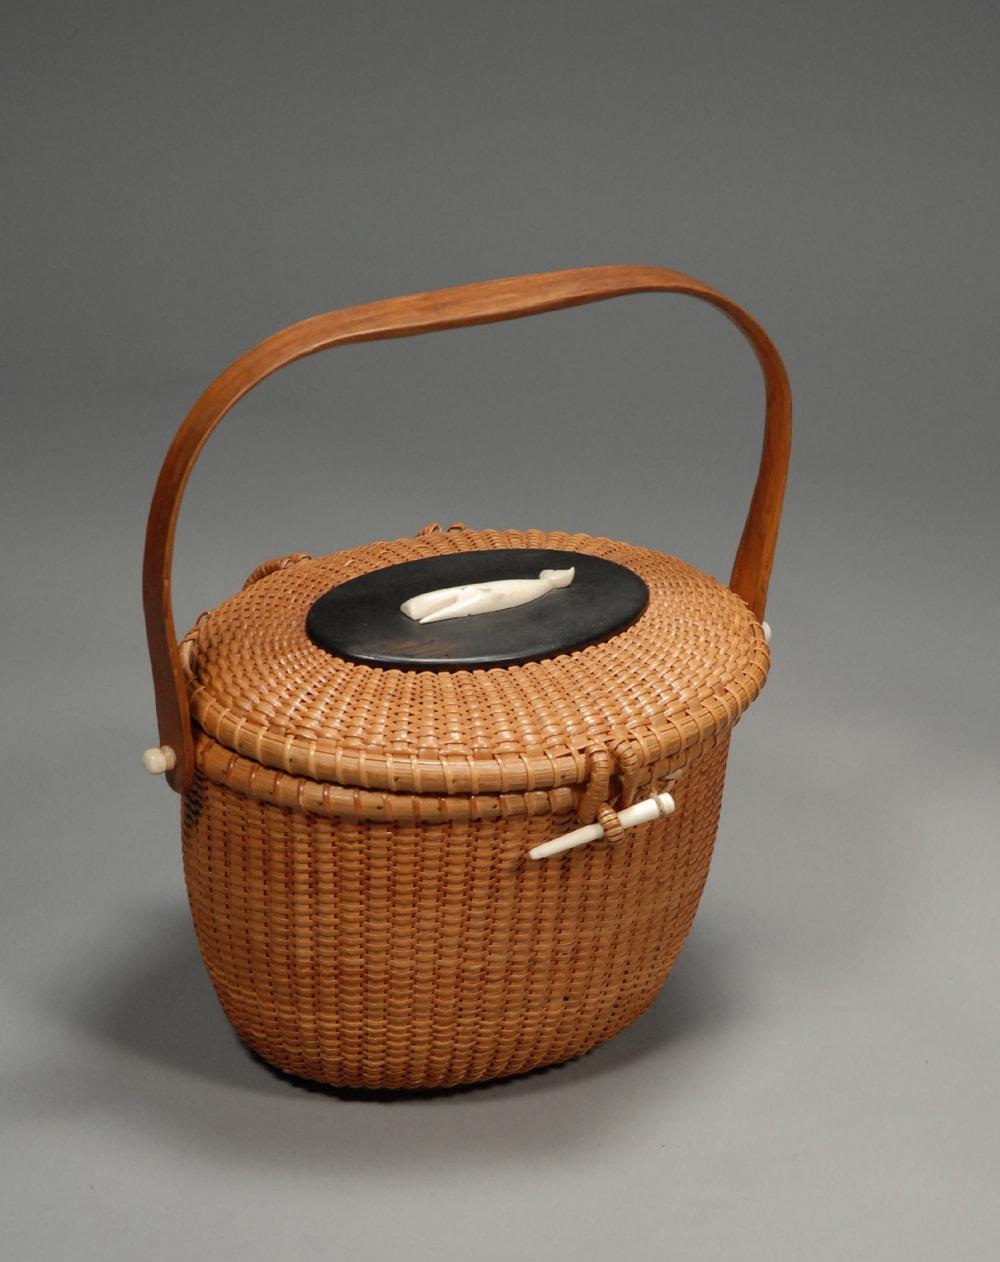 Nantucket purse and baskets by Reyes and others